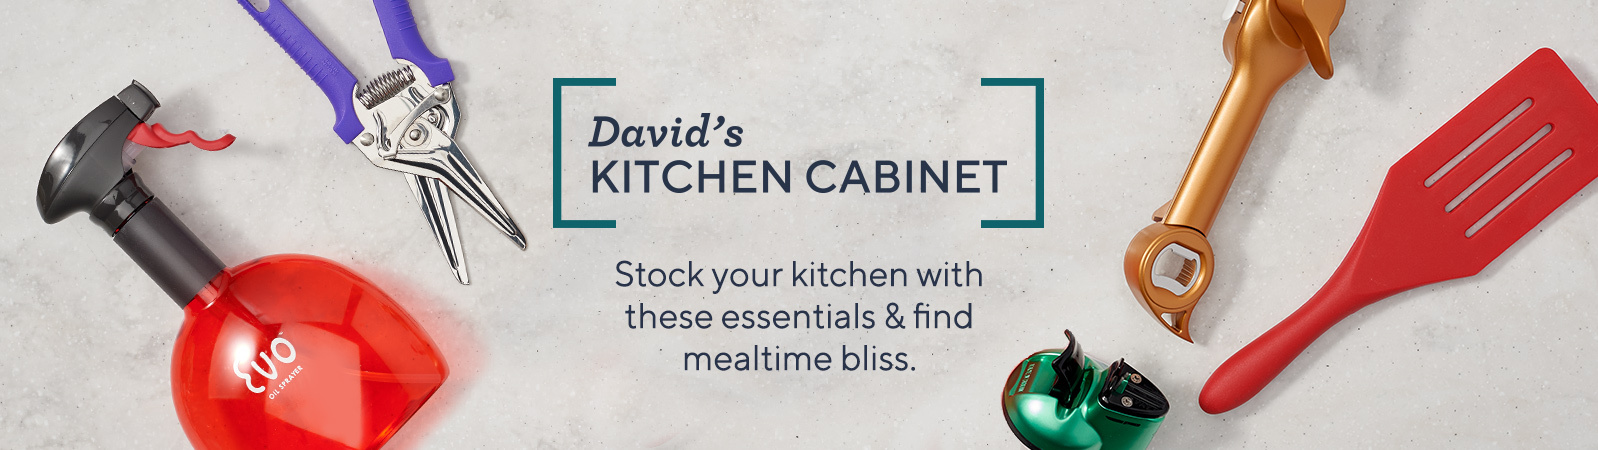 David's Kitchen Cabinet   Stock your kitchen with these essentials & find mealtime bliss. 